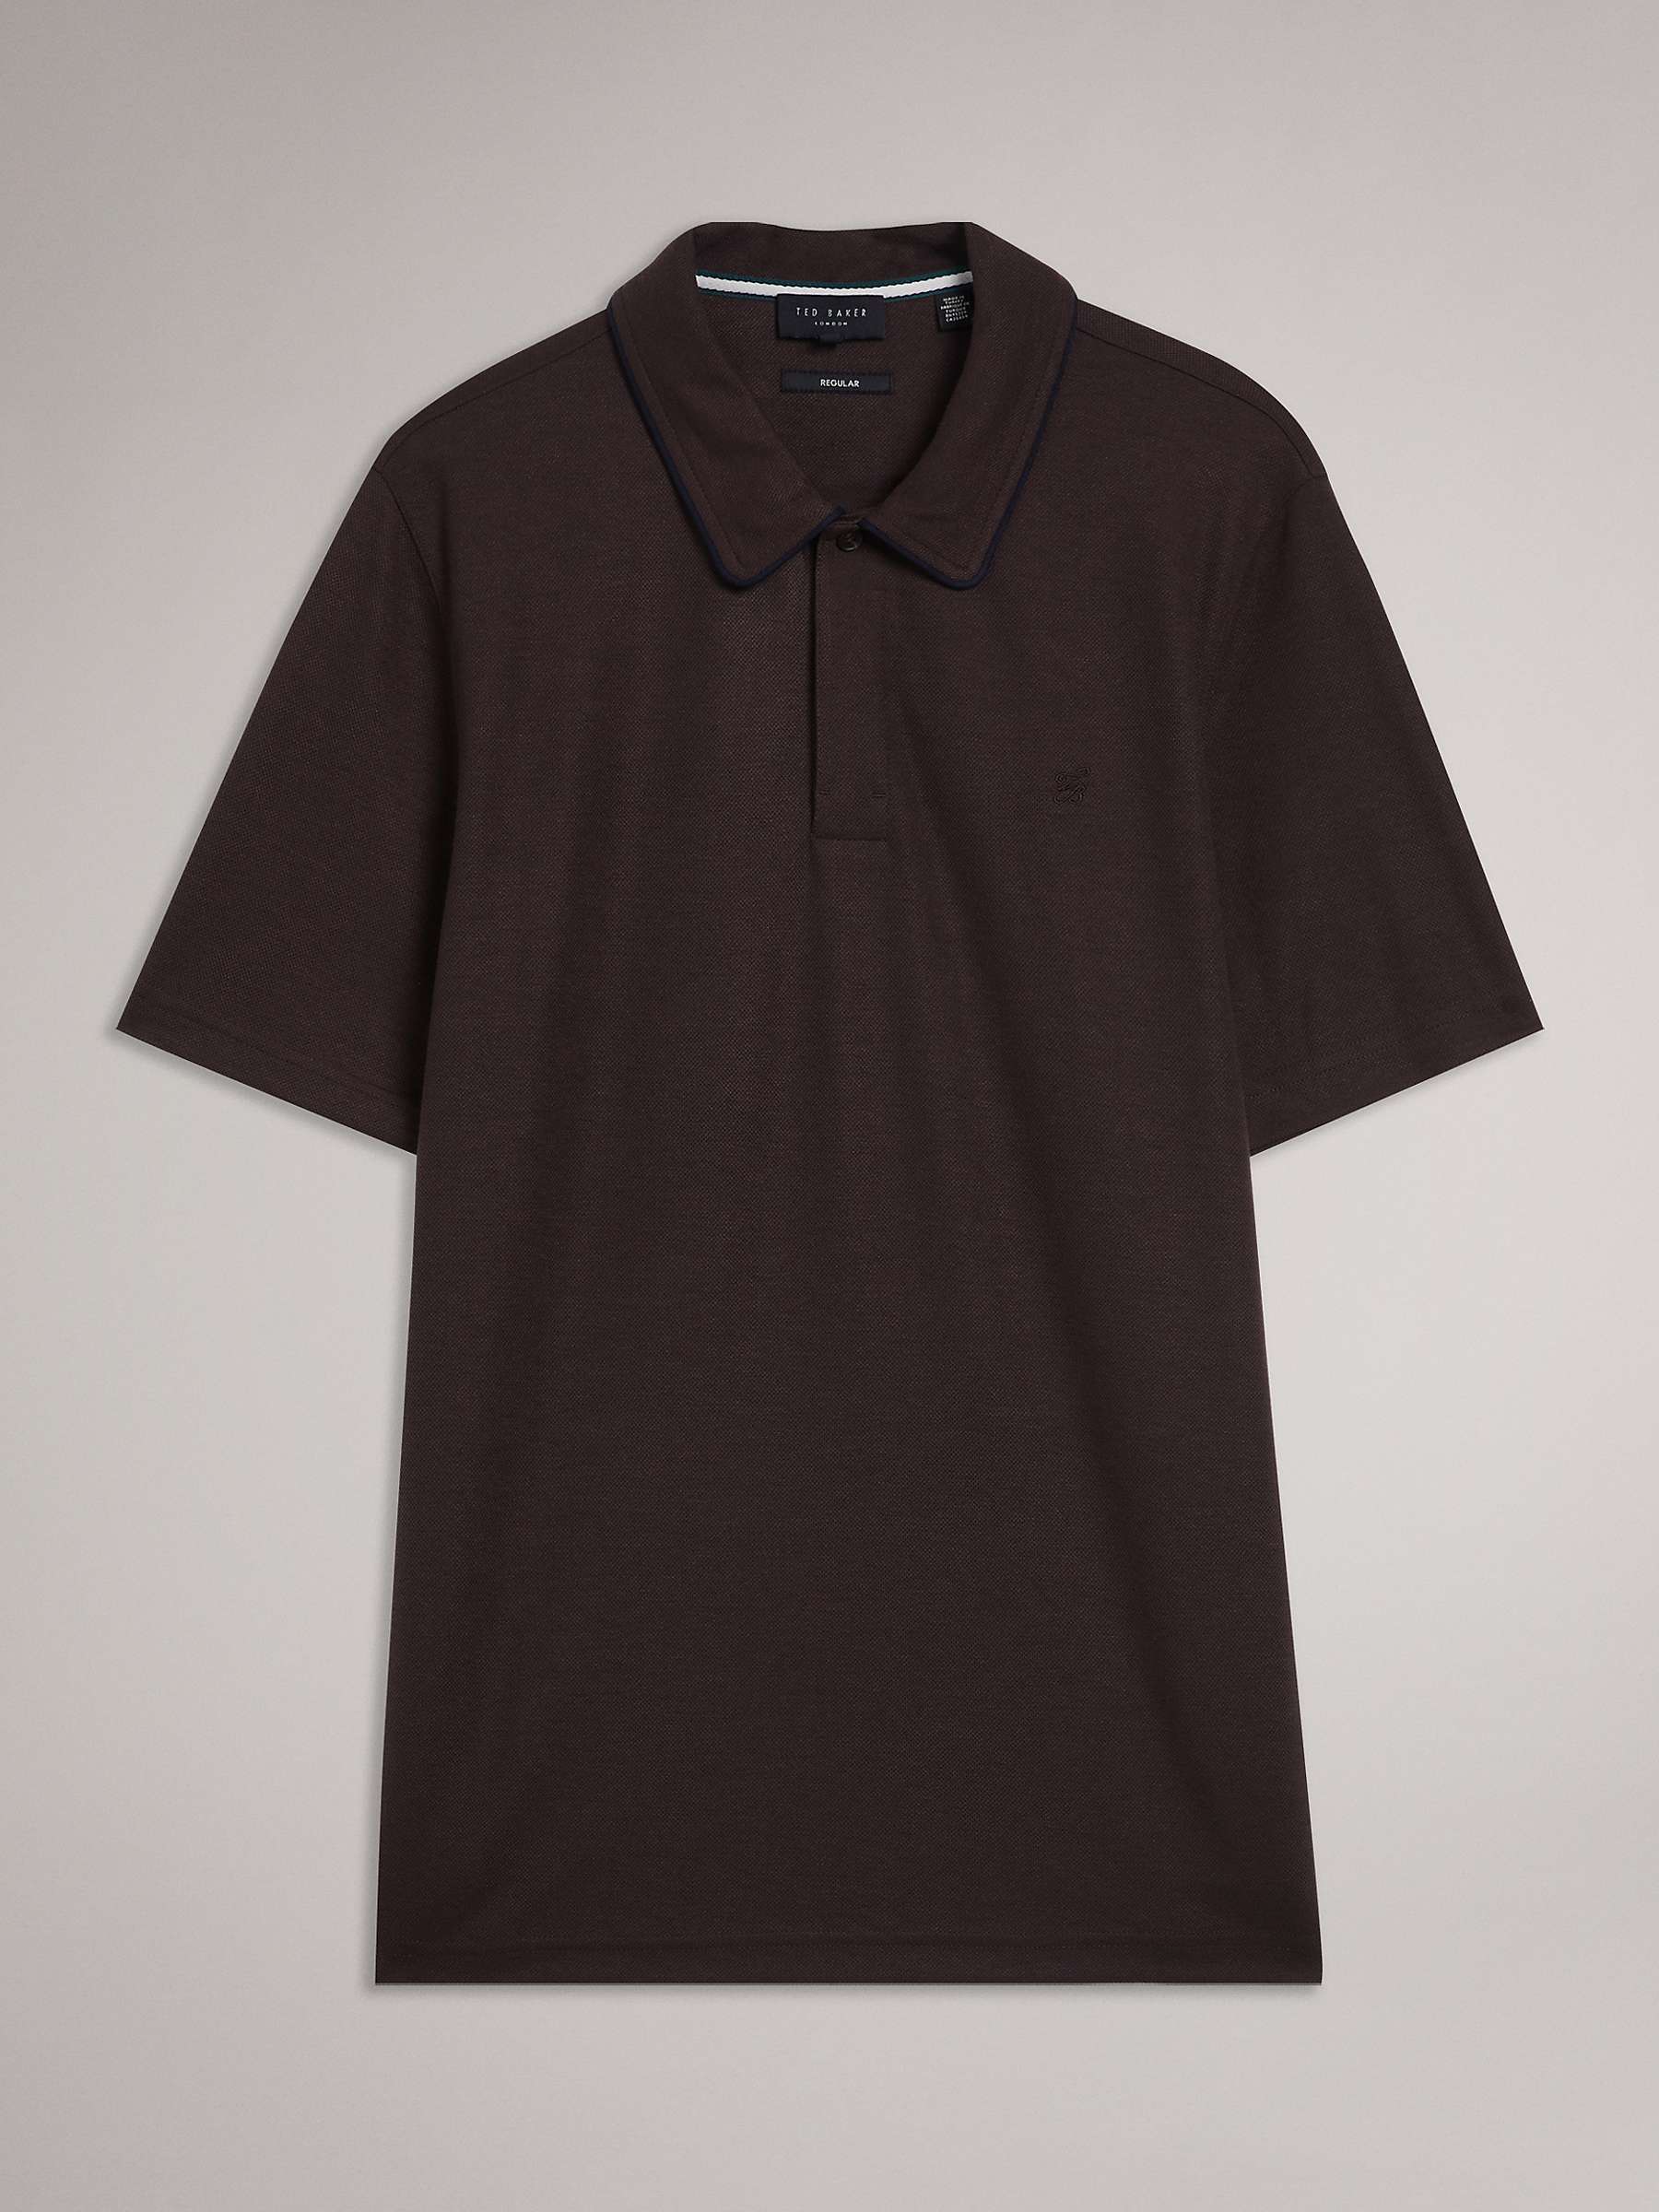 Buy Ted Baker Aroue Short Sleeve Auede Trim Polo Shirt Online at johnlewis.com